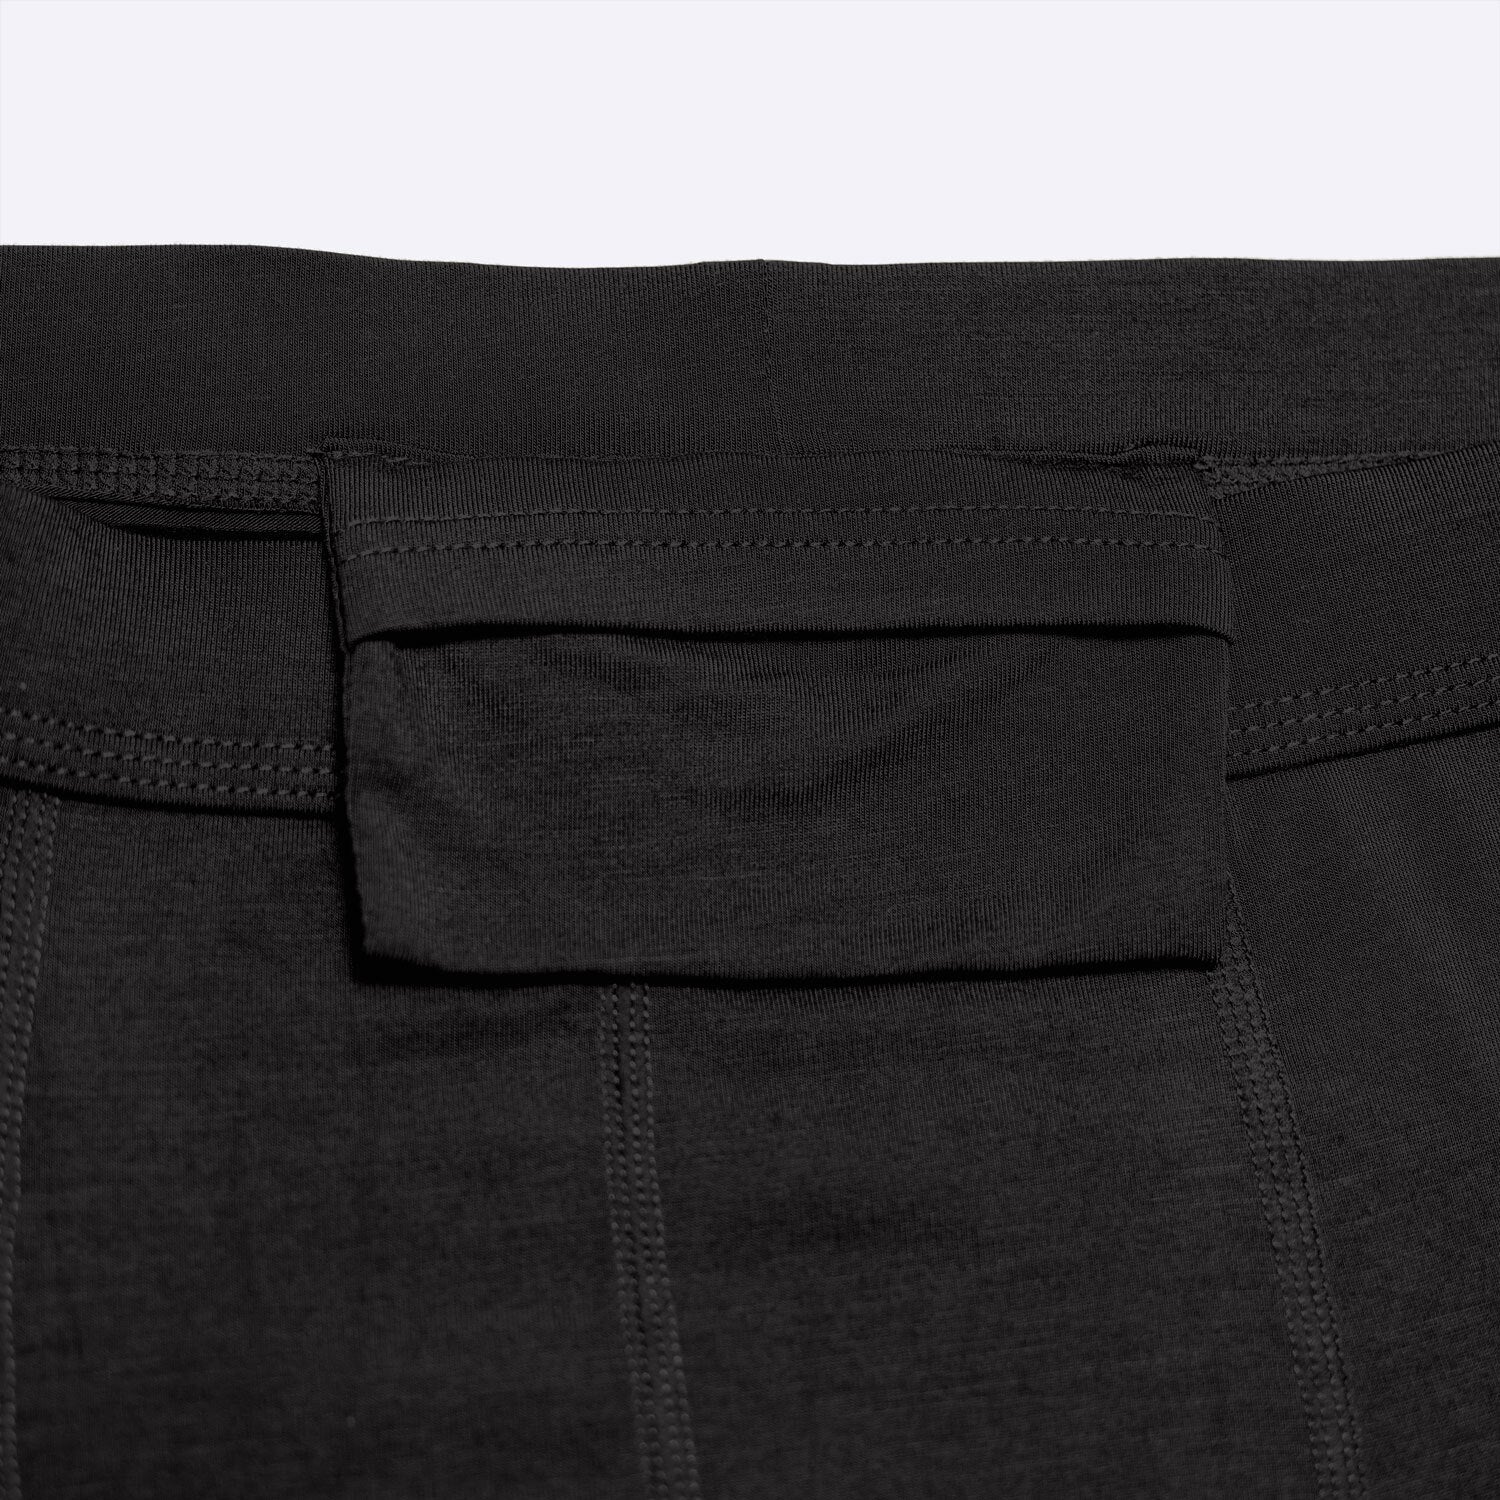 The Limited Edition Utility underwear V2 for men in the USA and Canada